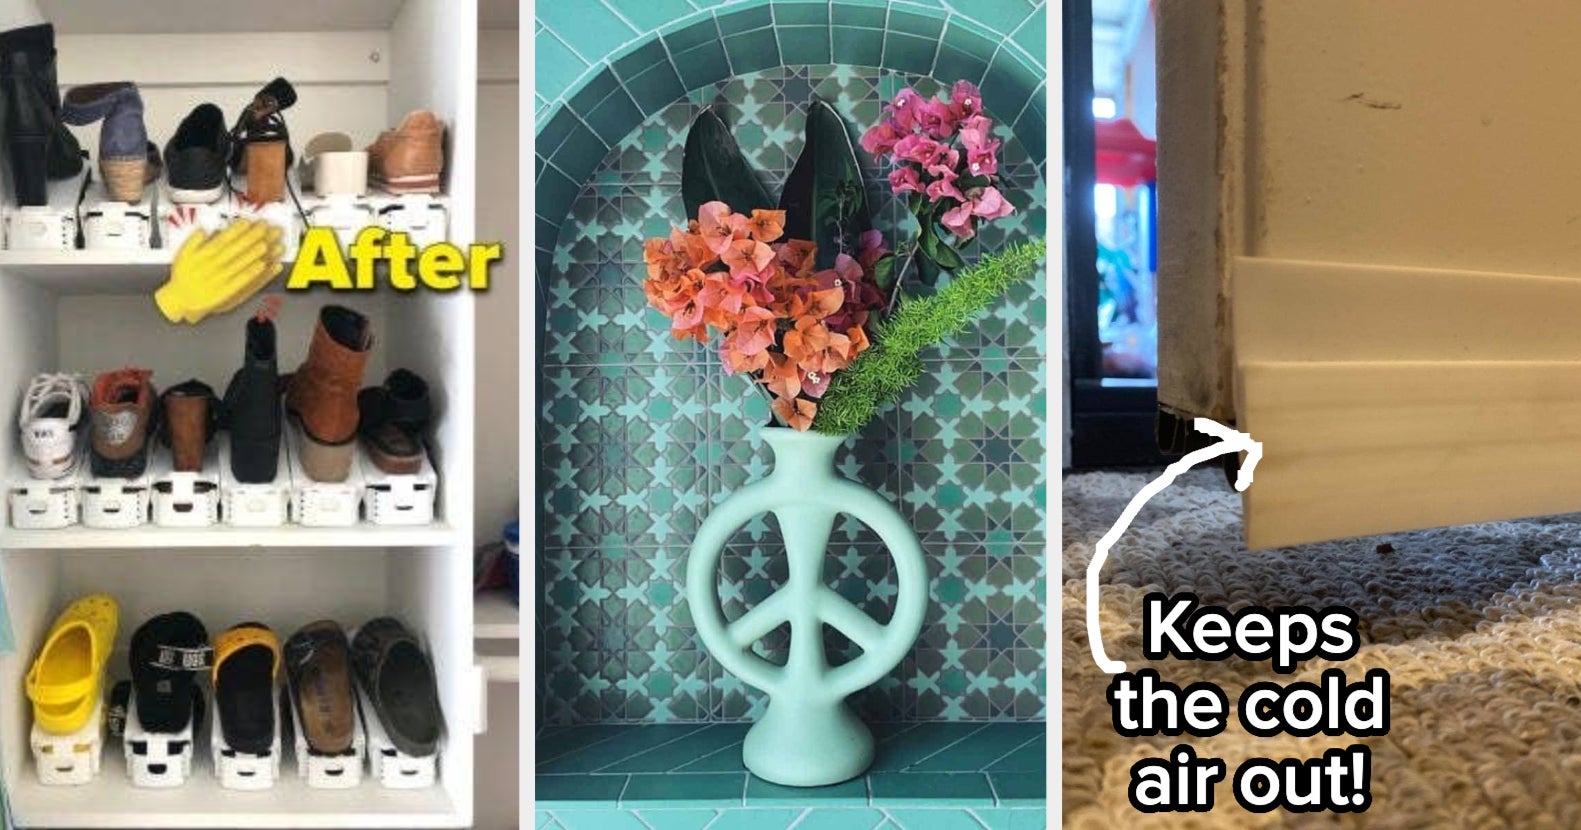 47 Home Products That Future You Will Be Thankful For